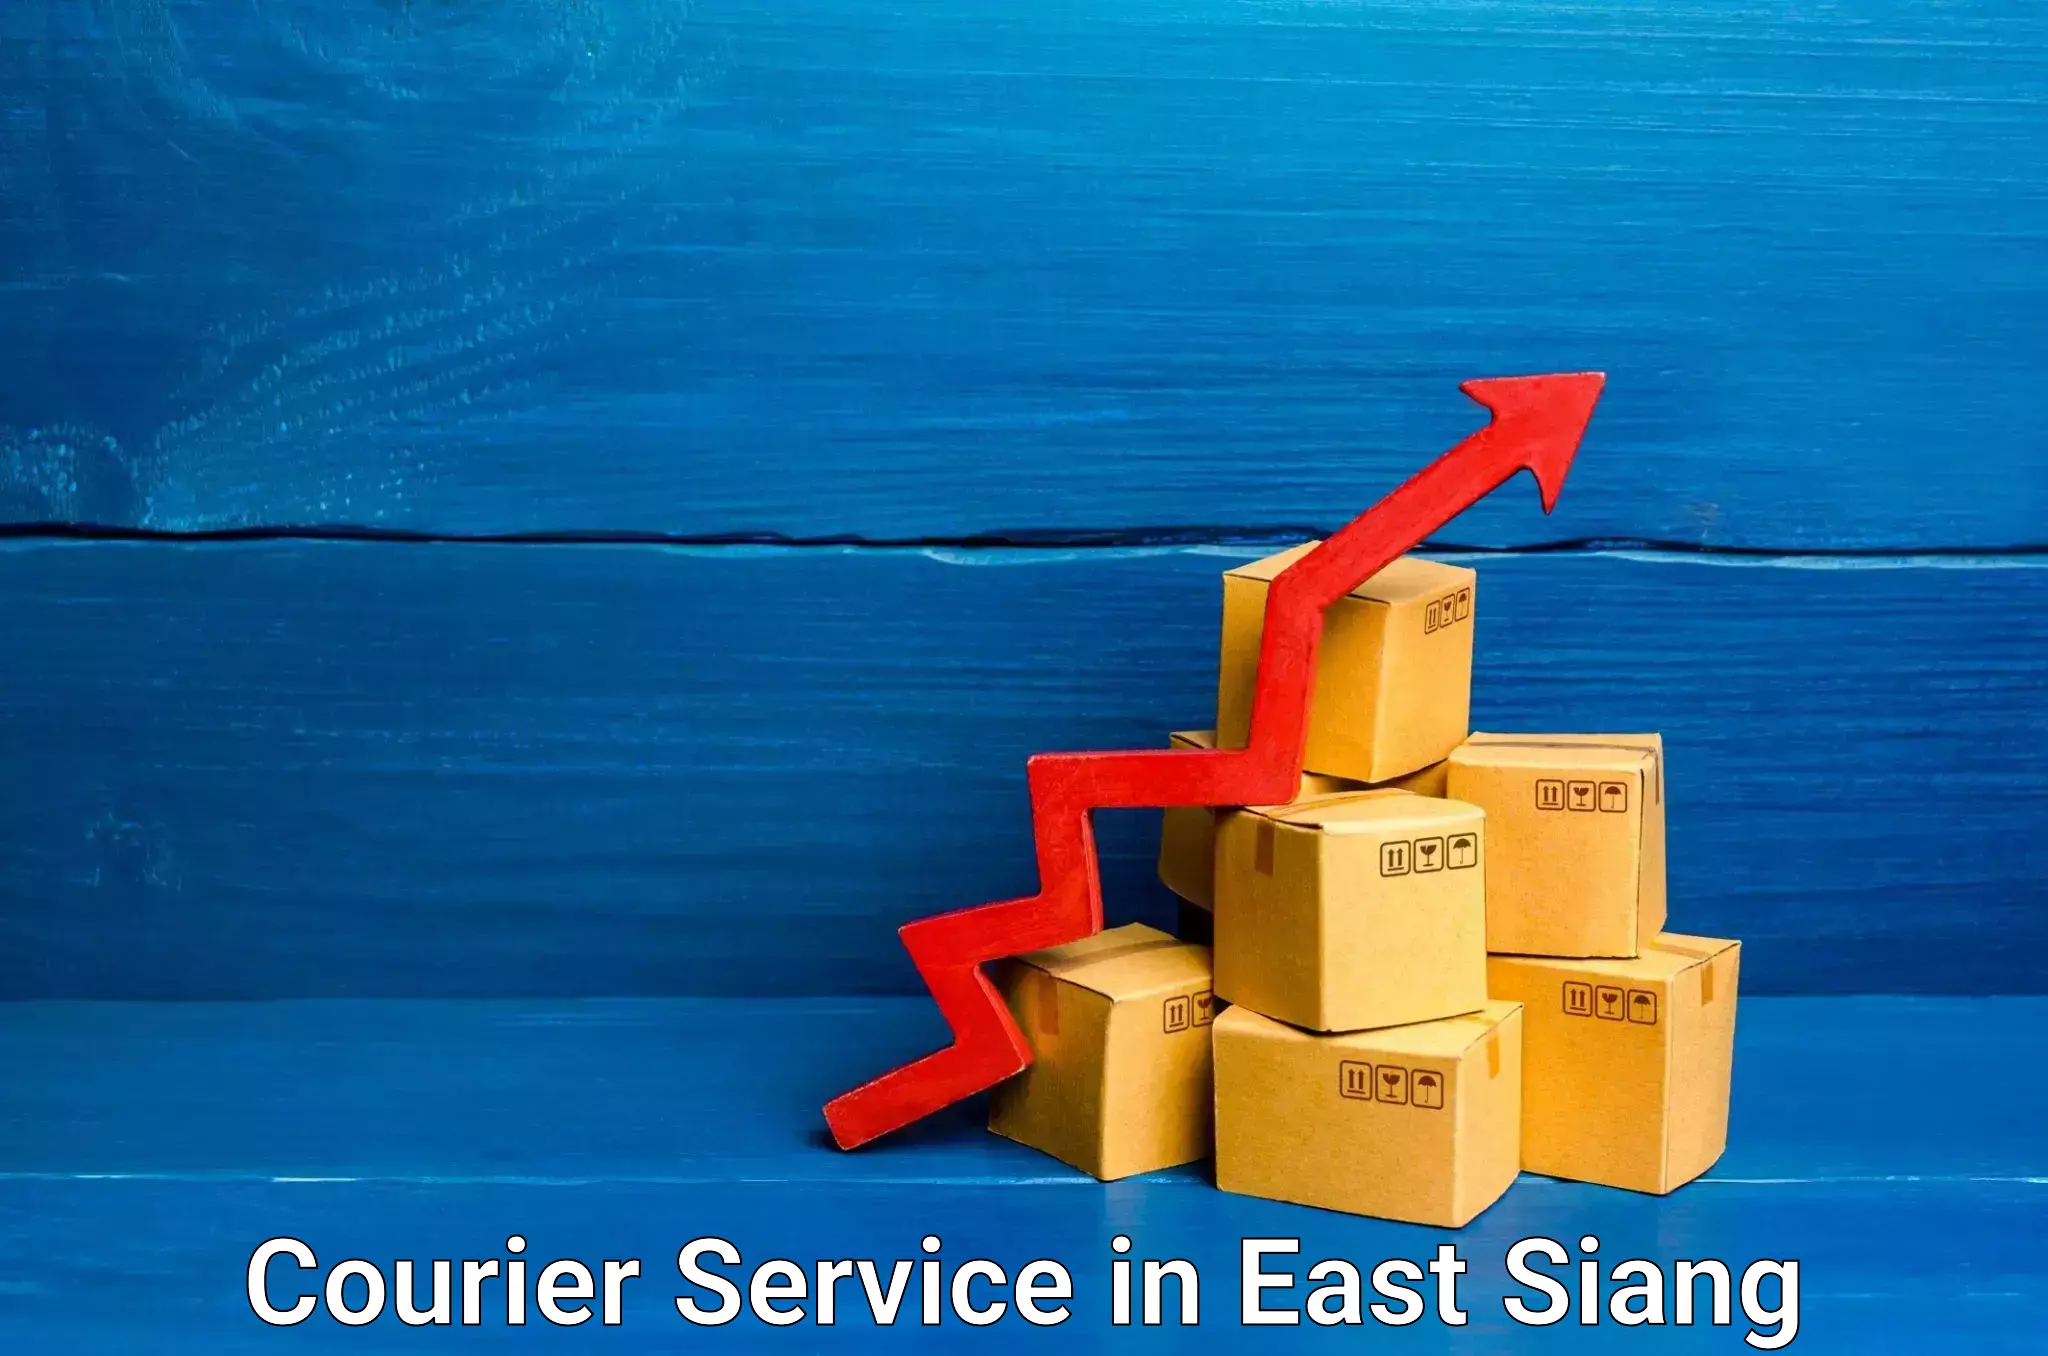 Secure package delivery in East Siang